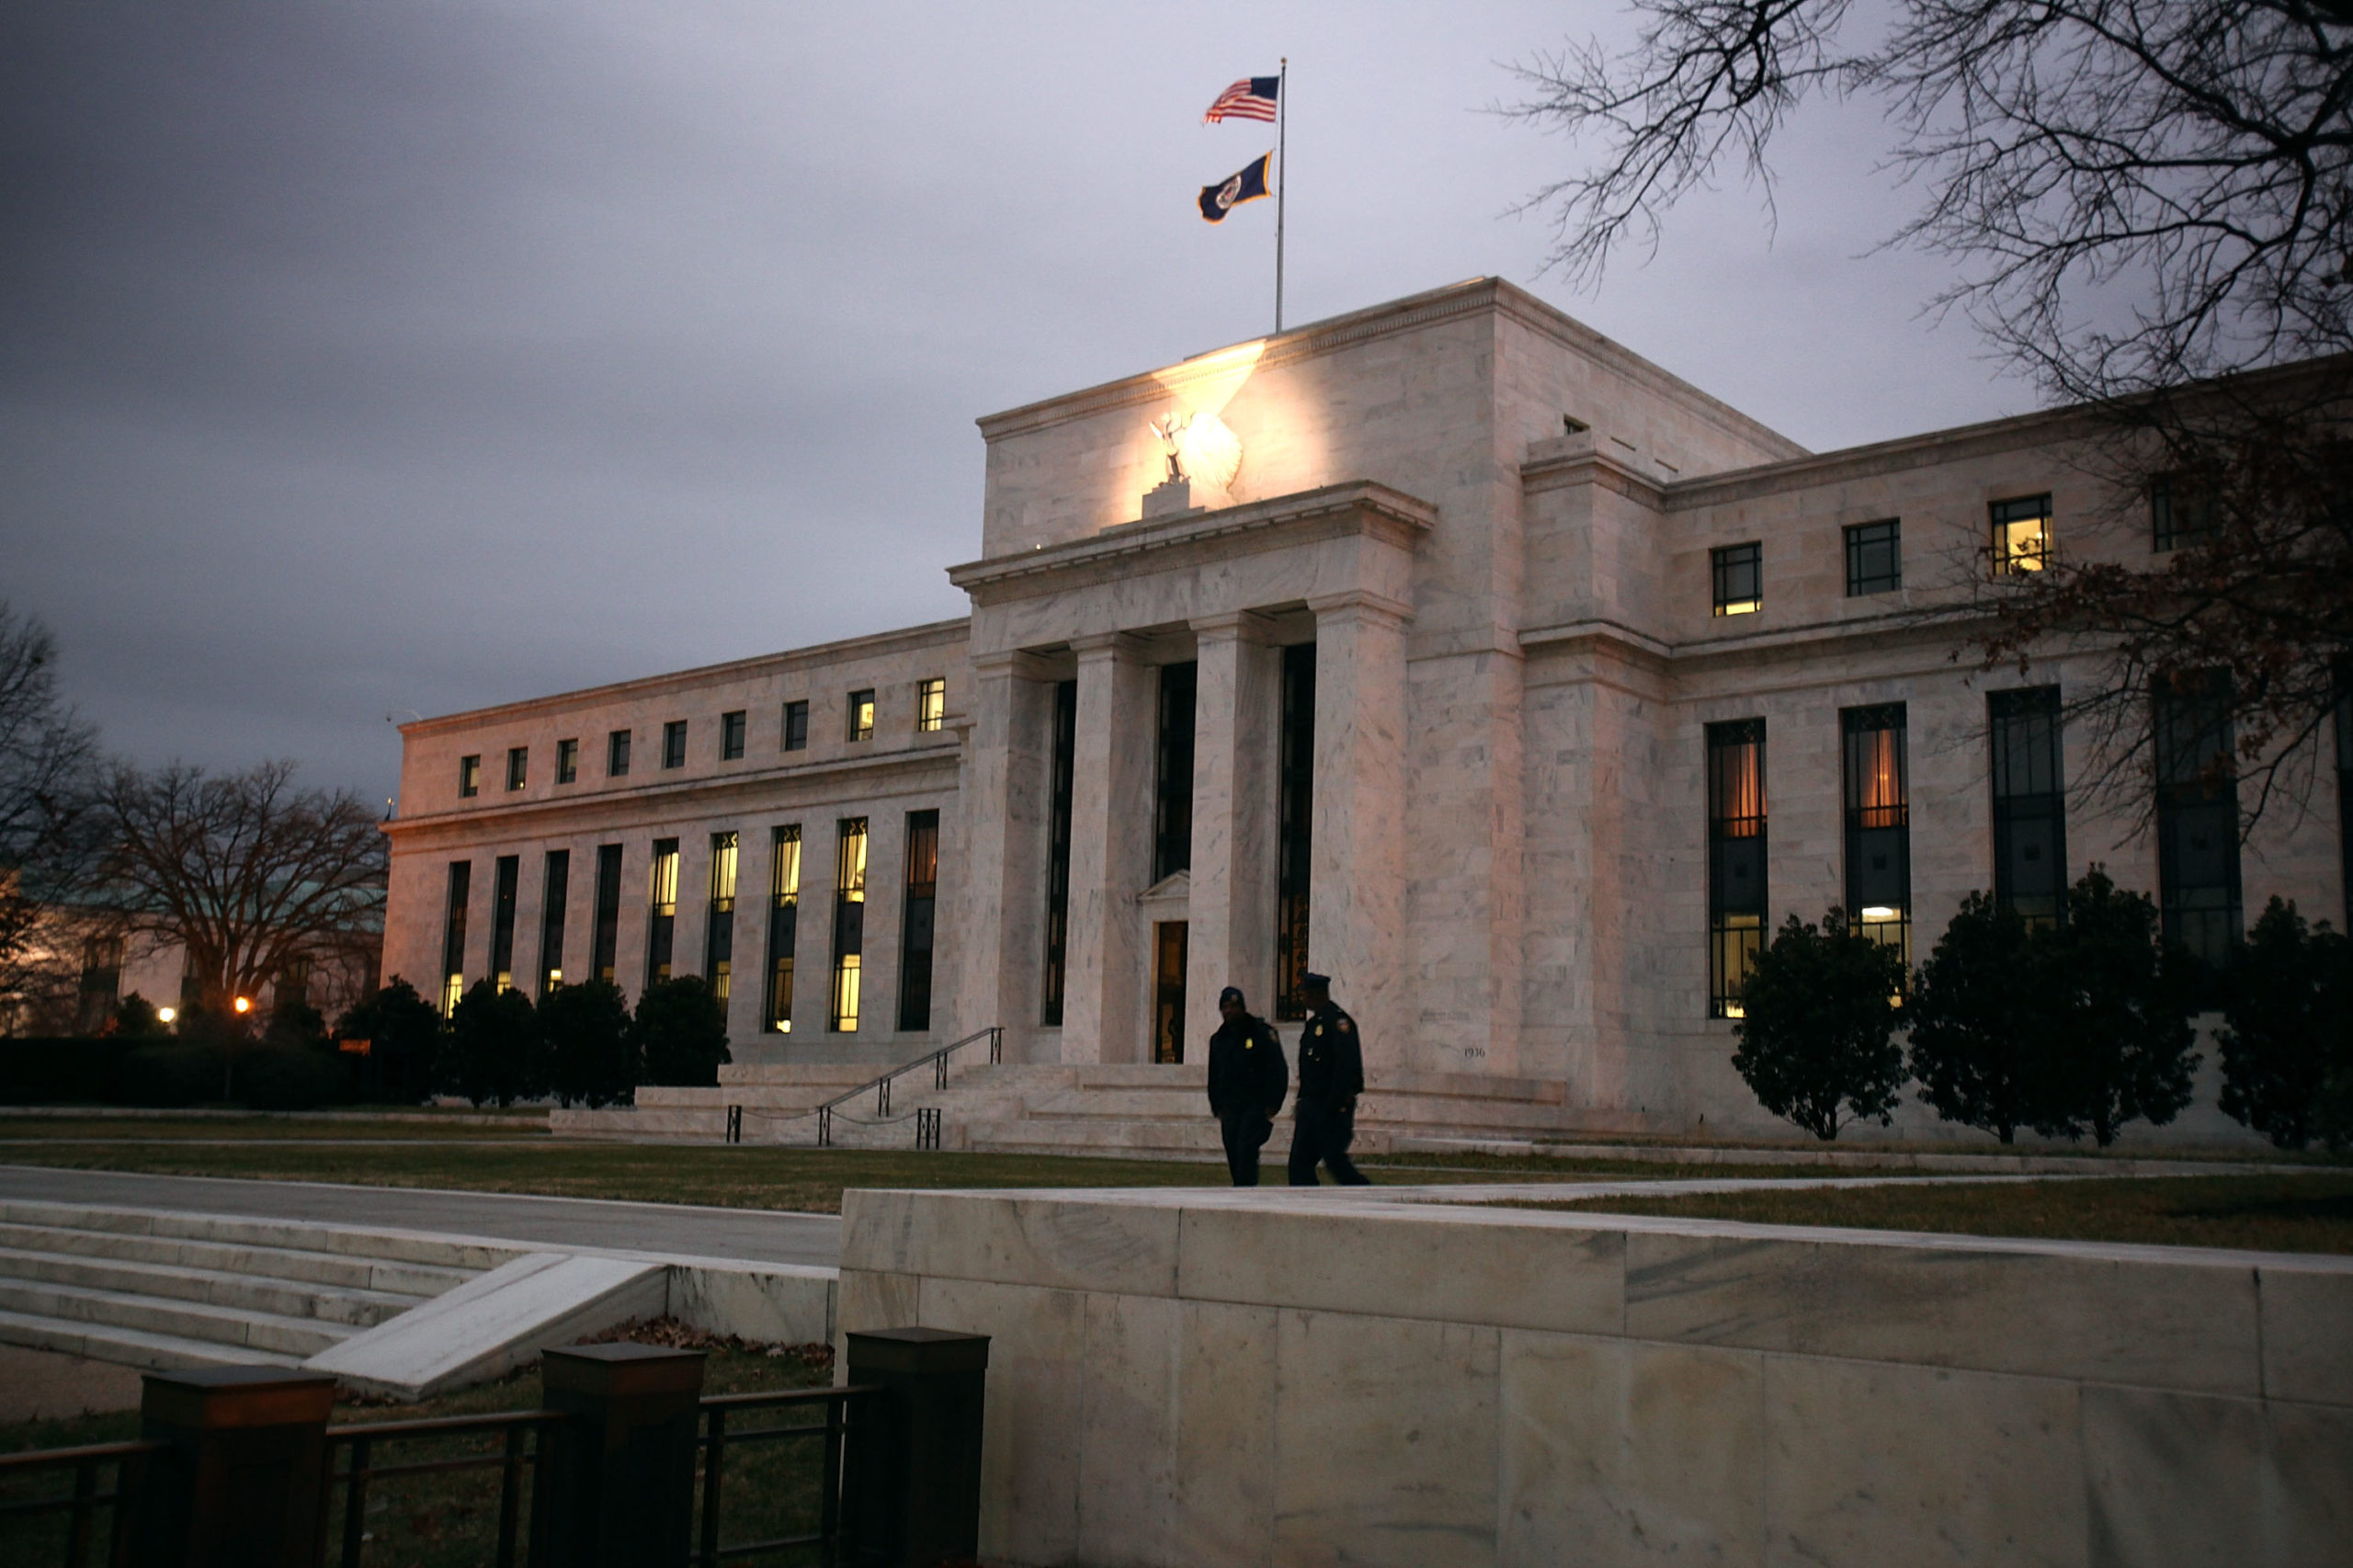 WASHINGTON - DECEMBER 16: Flags fly over the Federal Reserve Building on December 16, 2008 in Washington, D.C. The Fed began its last meeting of 2008 today, where it is expected to announced another reduction in the key interest rate, amongst other measures meant to stimulate the economy. (Photo by Mark Wilson/Getty Images)